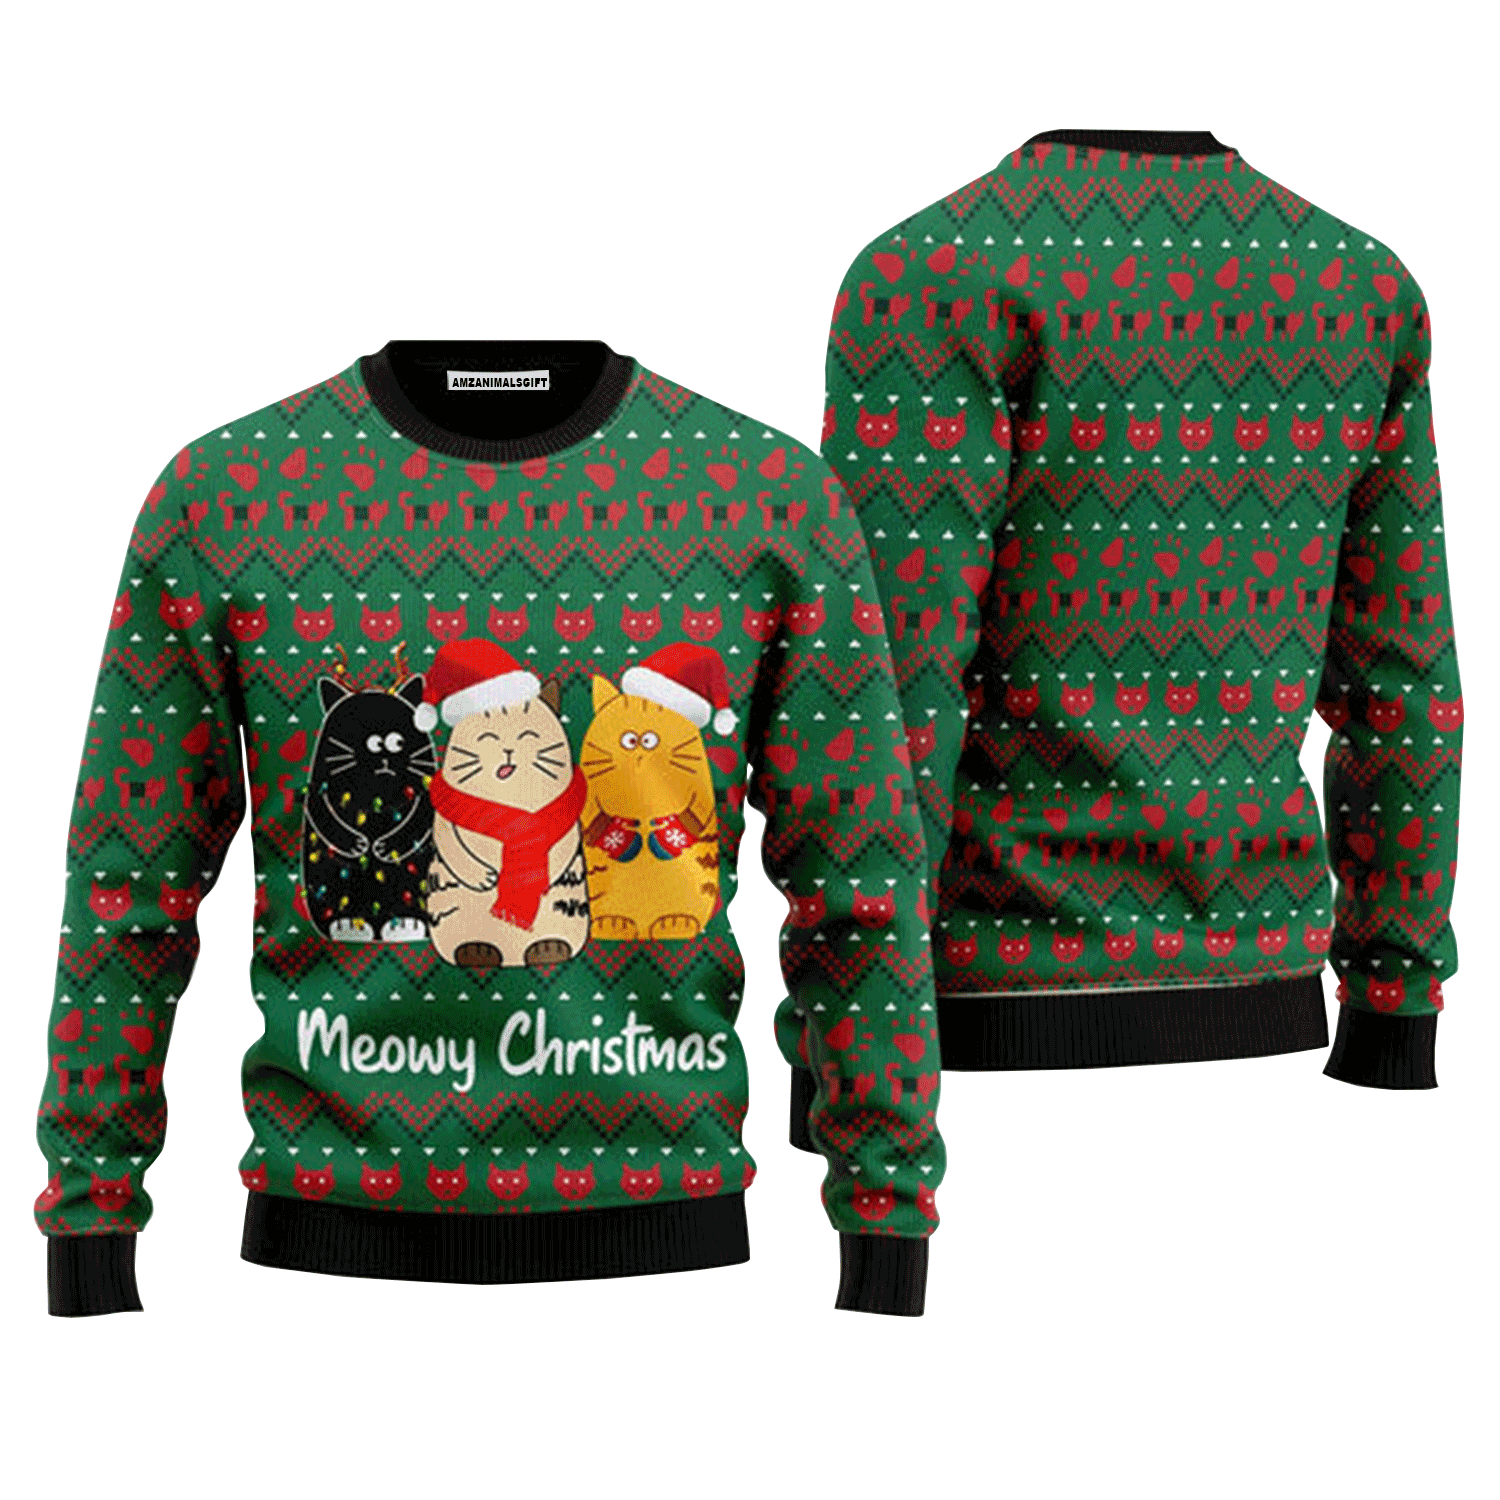 Cat Sweater Meowy Christmas- Cute Cat Ugly Christmas Sweater For Men & Women - Perfect Outfit For Christmas New Year Autumn Winter